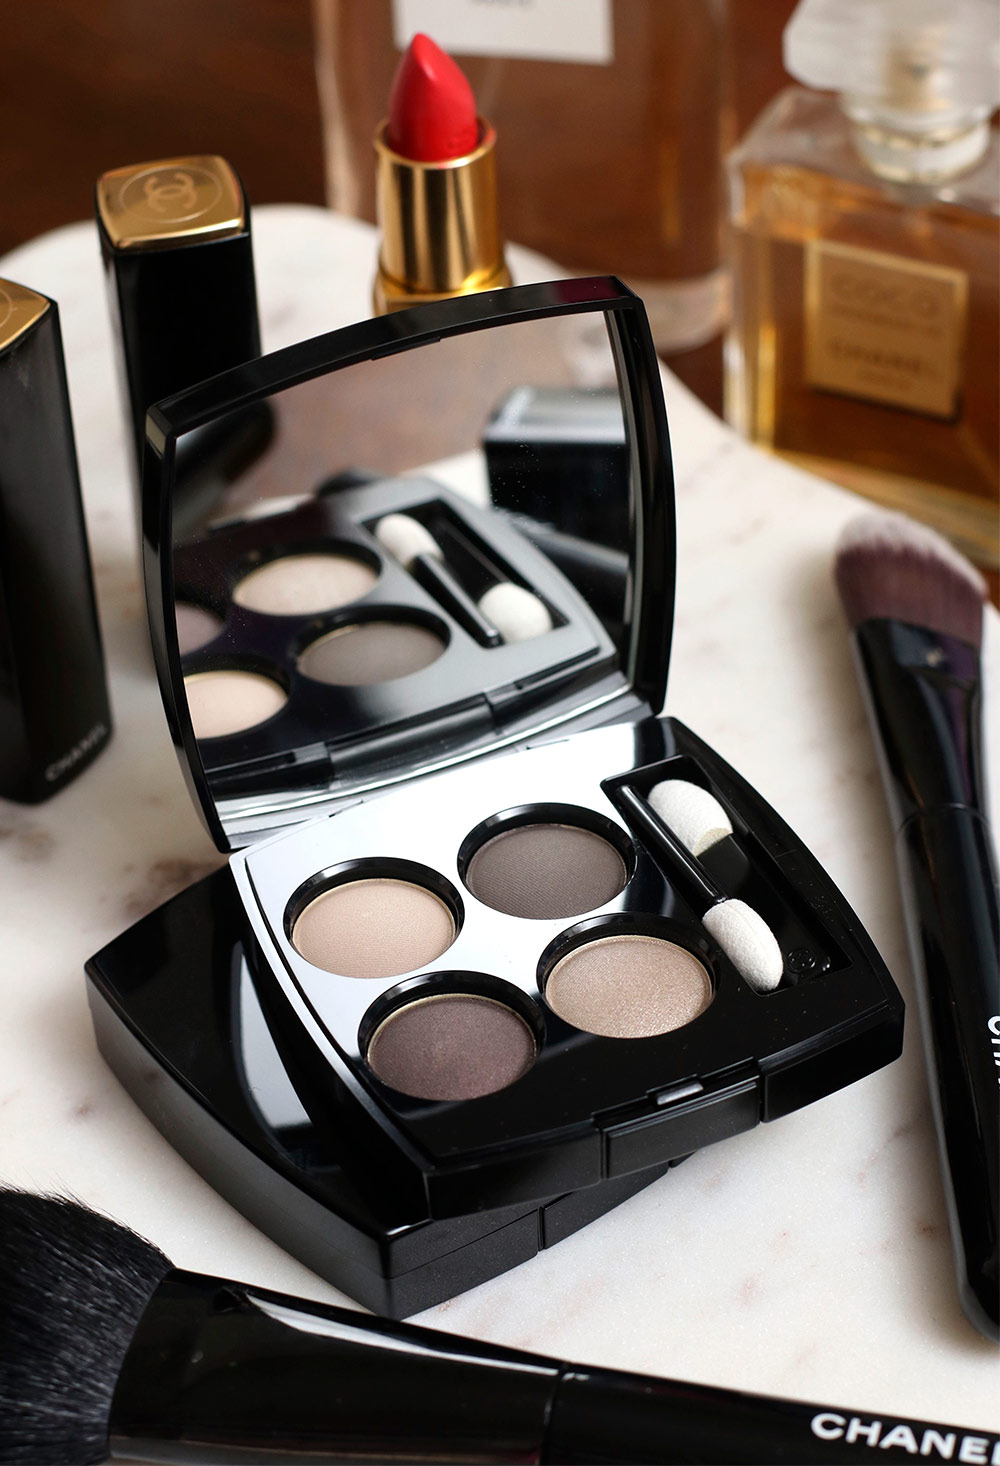 Building My Fall Makeup Wardrobe: The Chanel Blurry Grey Quad